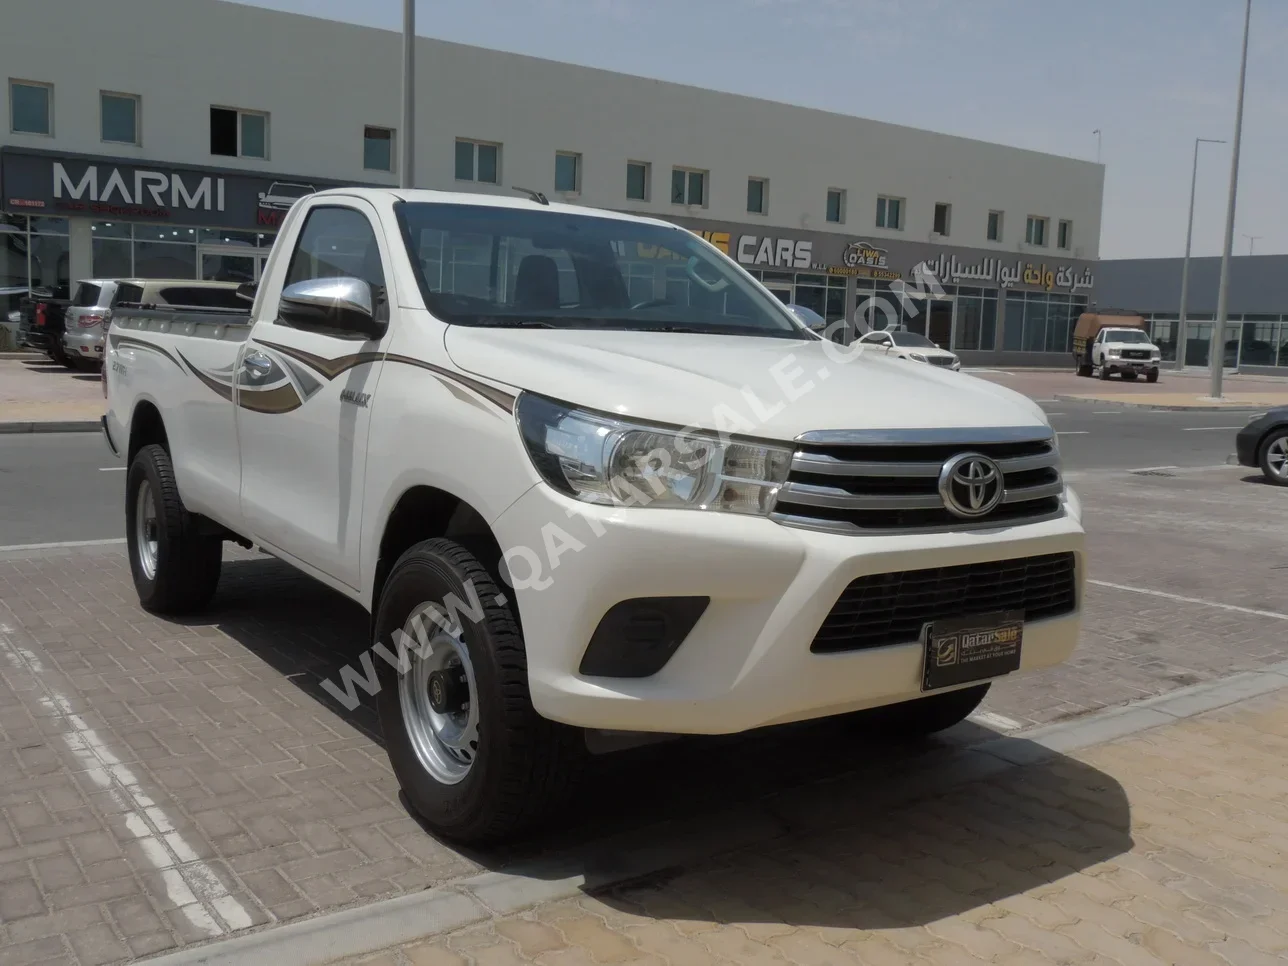 Toyota  Hilux  2019  Automatic  59,000 Km  4 Cylinder  Four Wheel Drive (4WD)  Pick Up  White